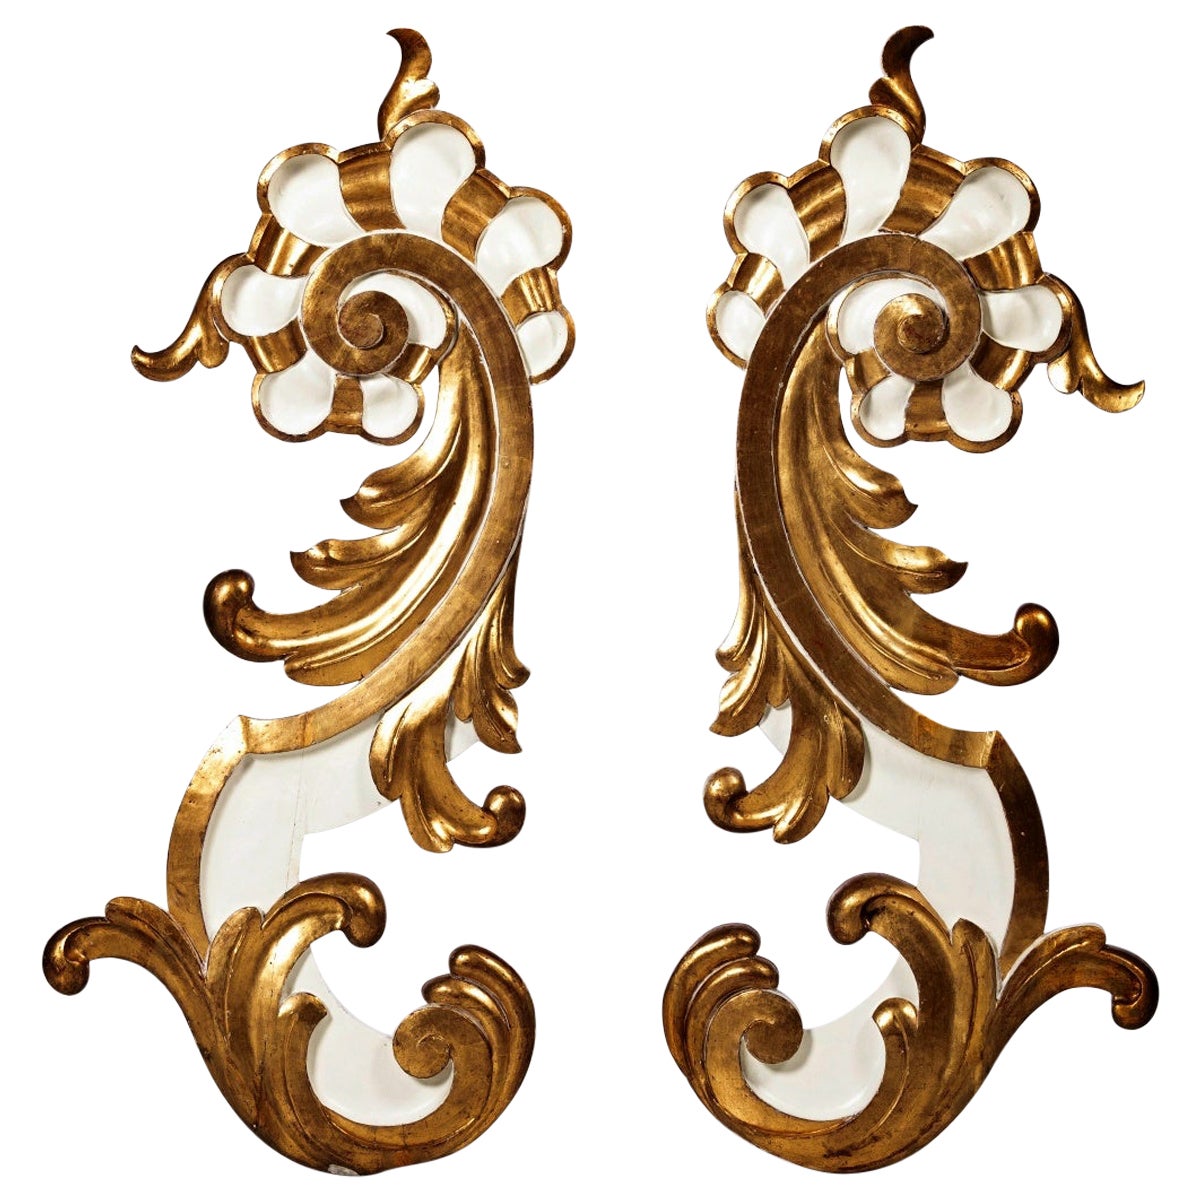 Pair of French Wood Carving Elements of the 18th Century